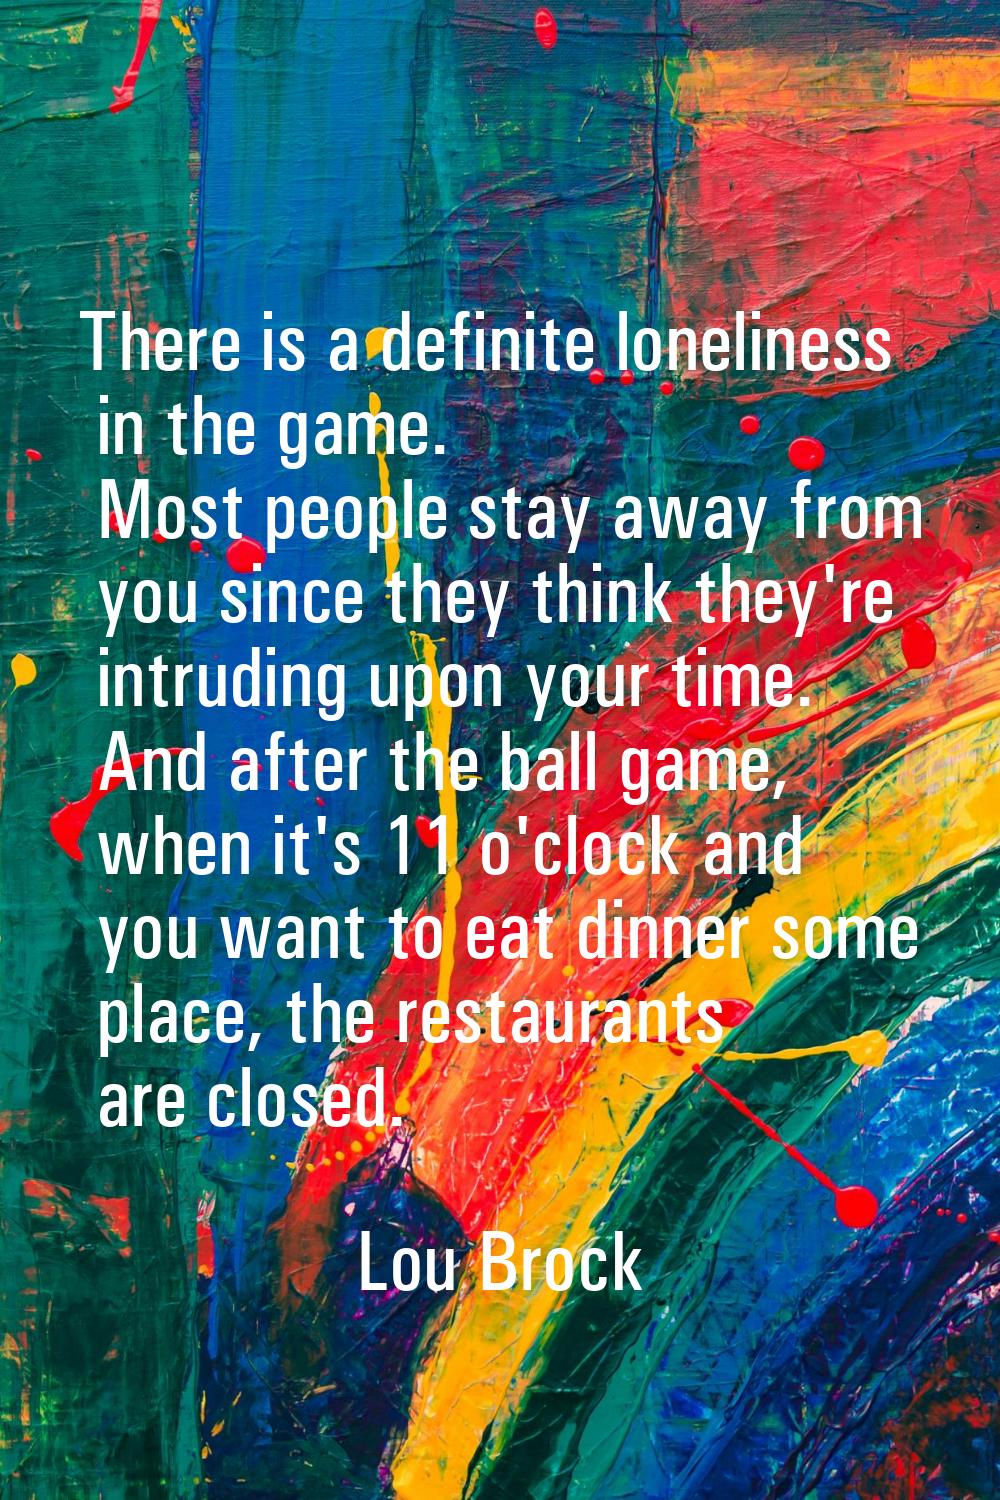 There is a definite loneliness in the game. Most people stay away from you since they think they're